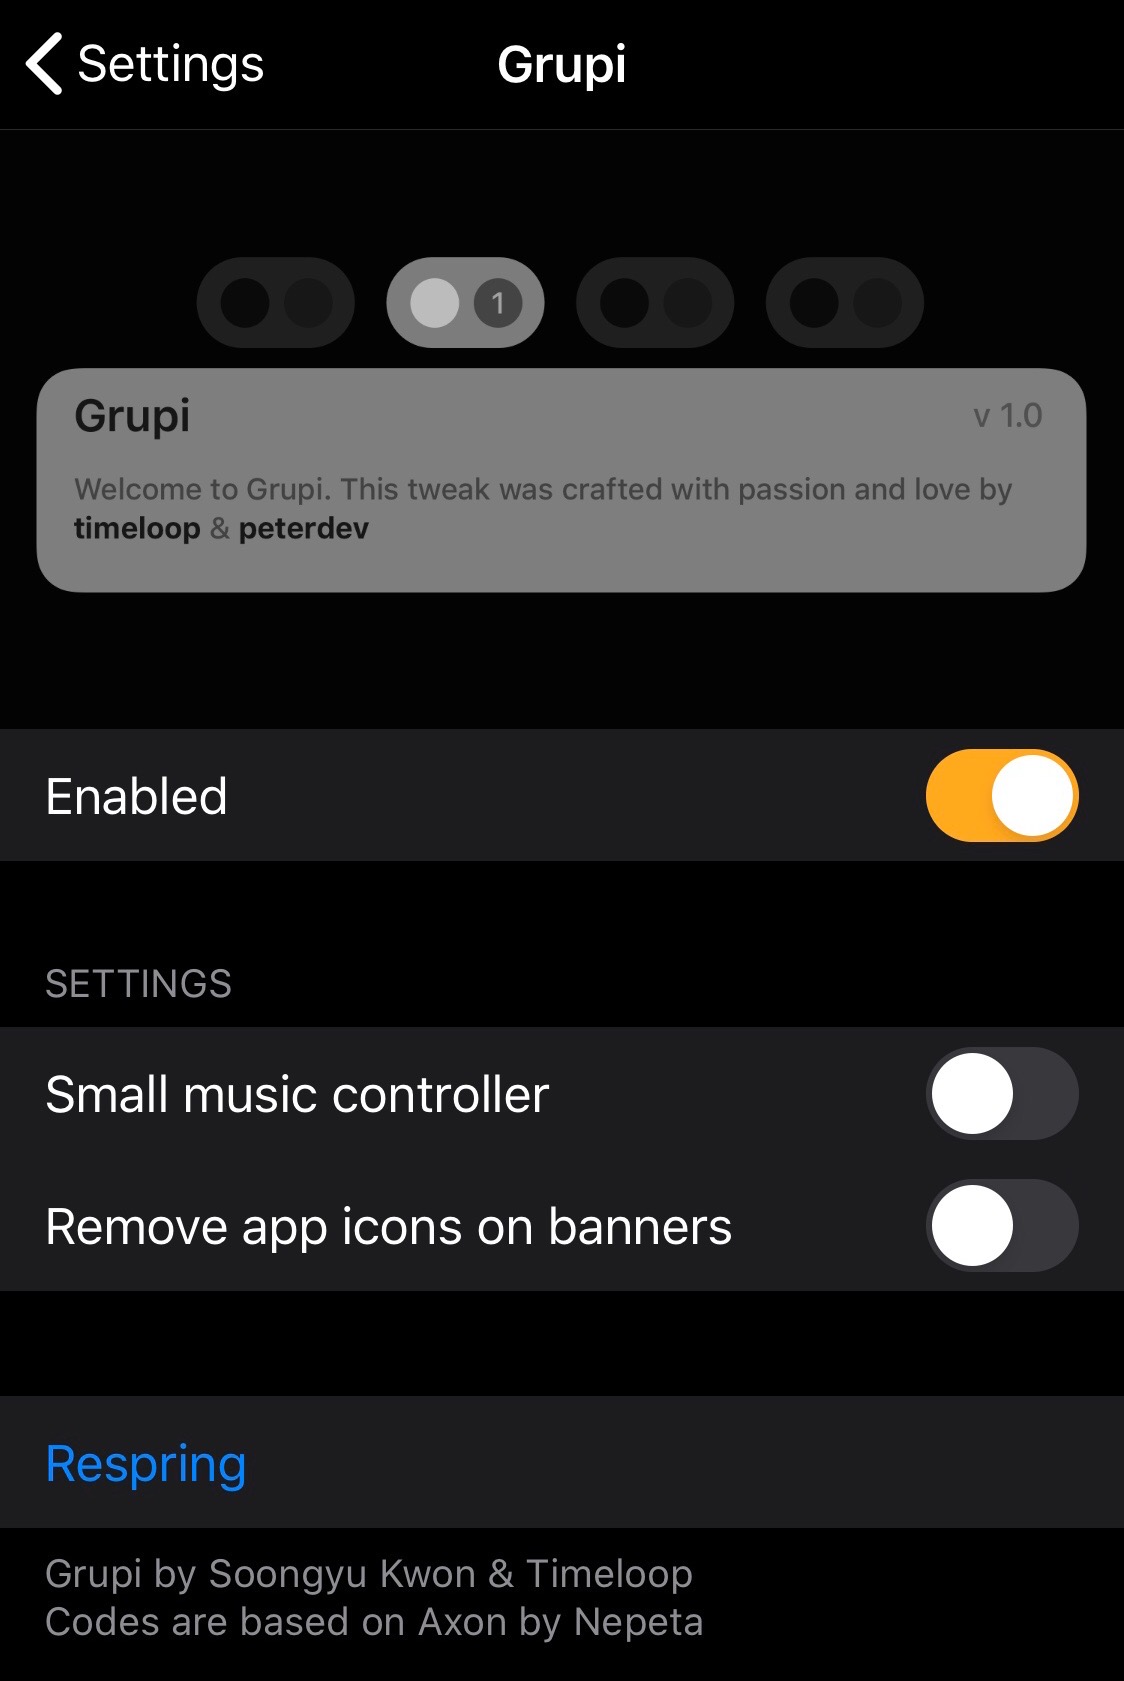 Grupi organizes missed notifications by app on the Lock screen